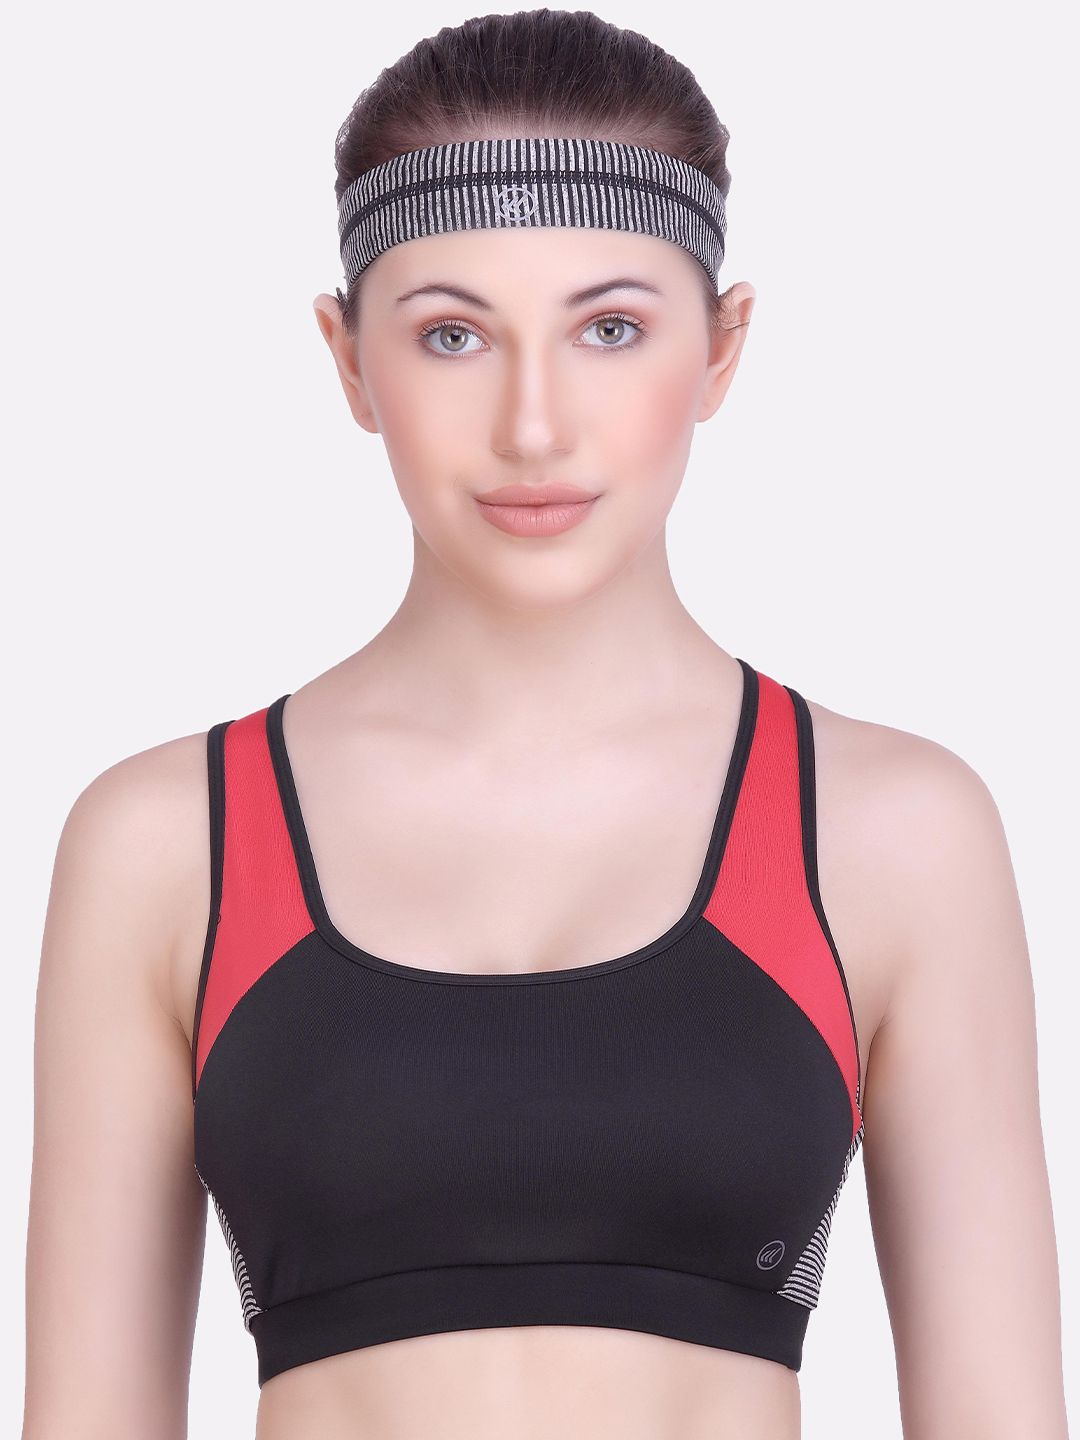 LAASA SPORTS Black & Red Dry Fit RacerBack Workout Bra Price in India